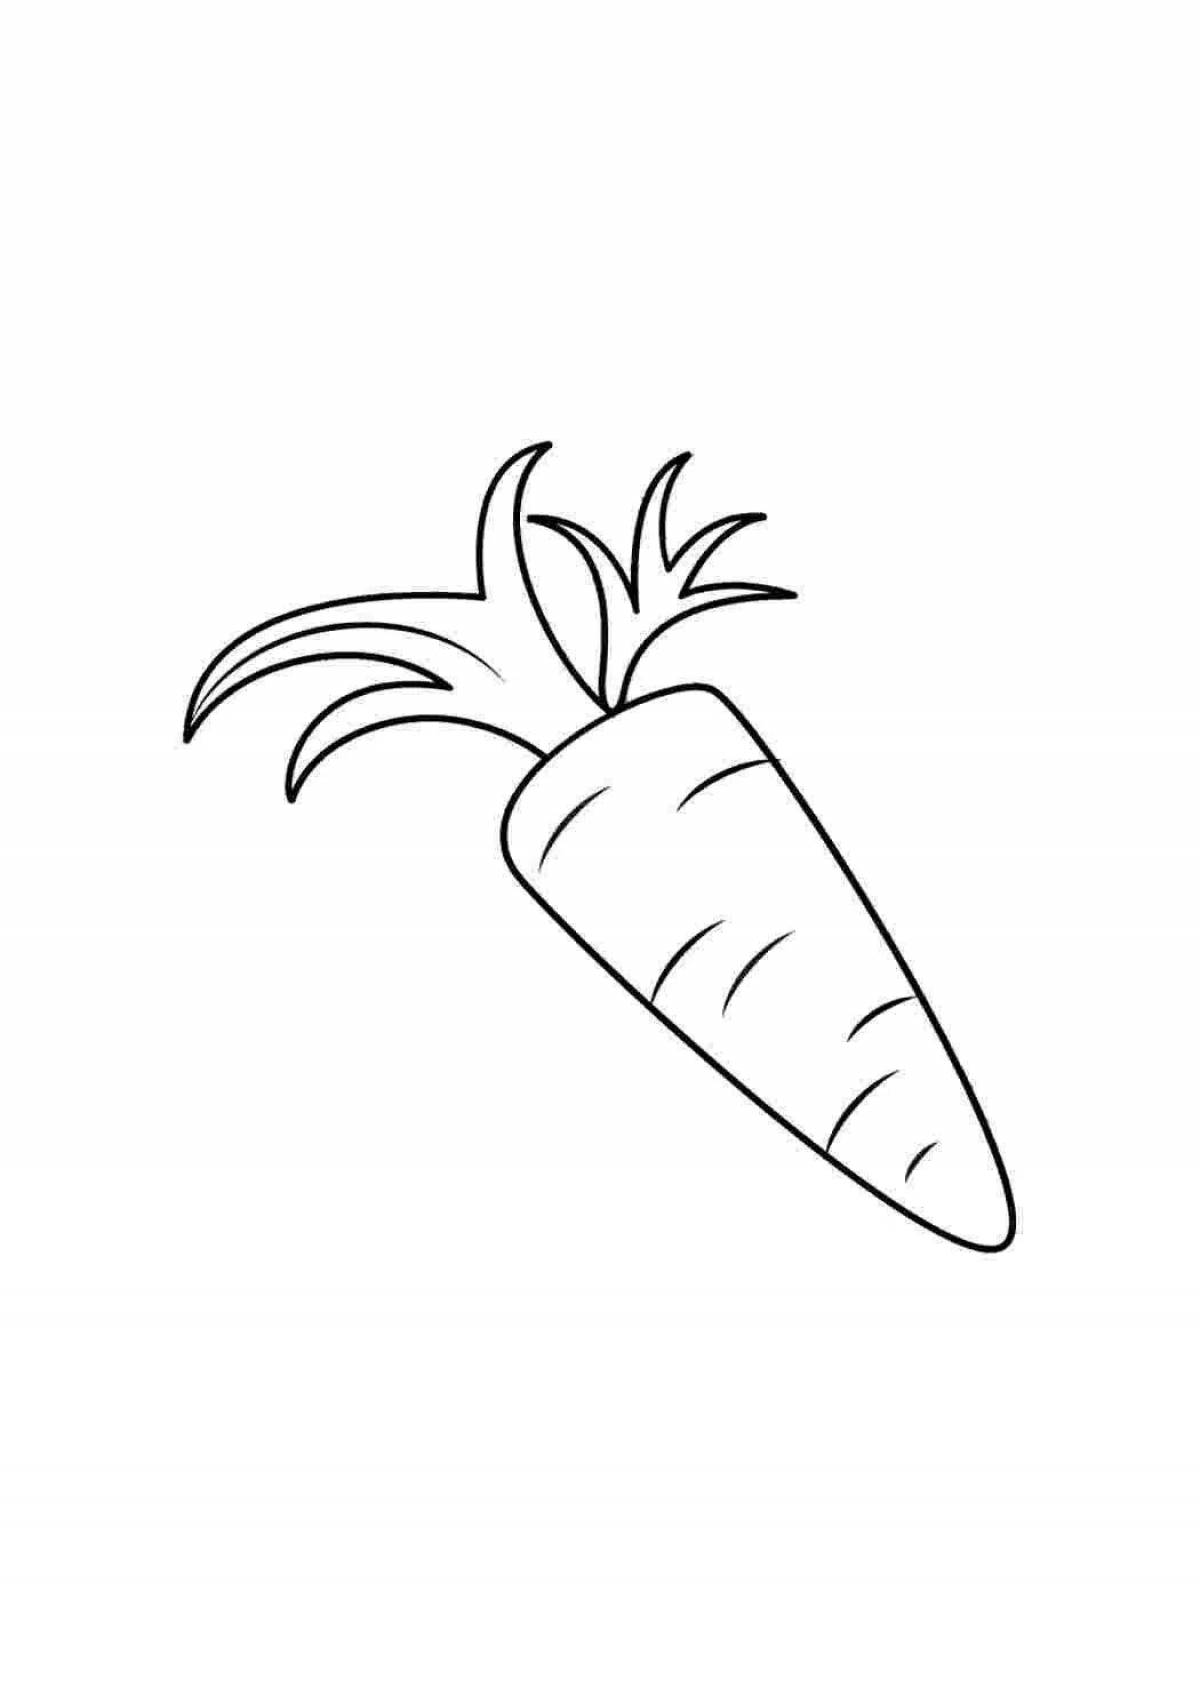 Exciting carrot pattern coloring page